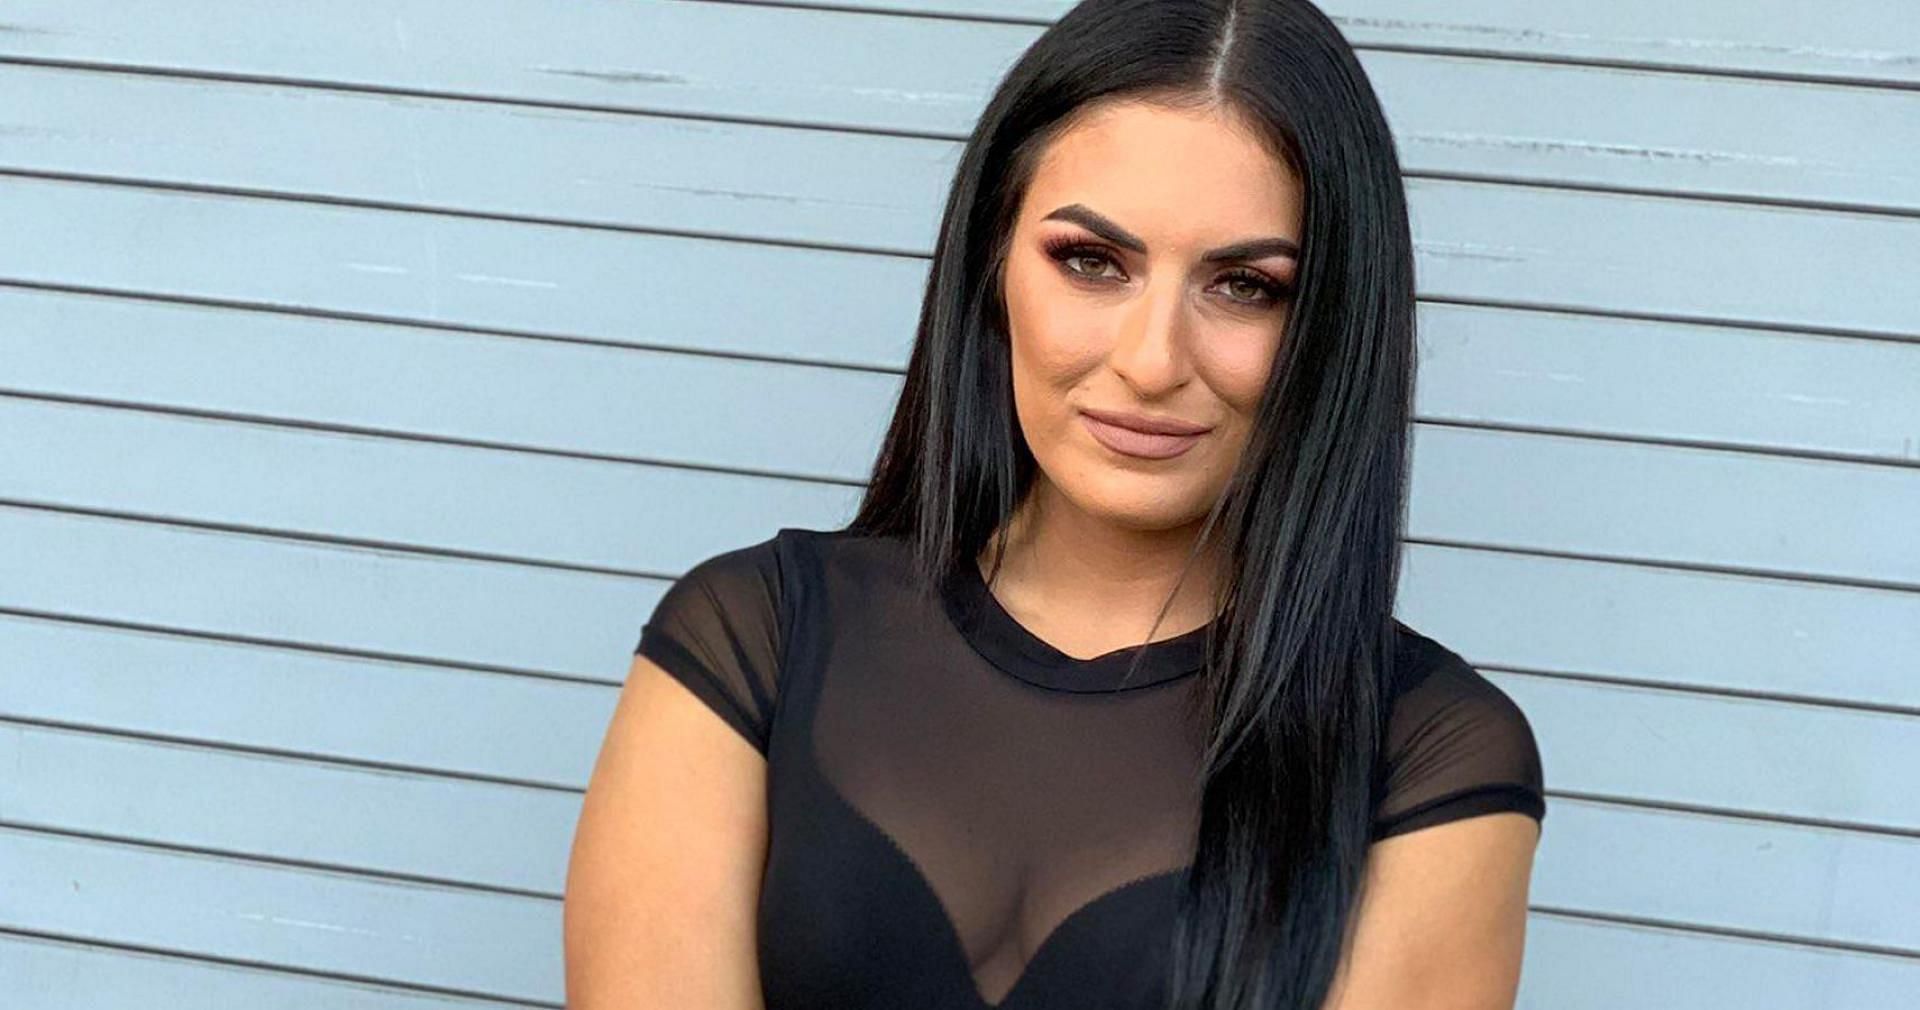 Sonya Deville currently acts an Official for the company!